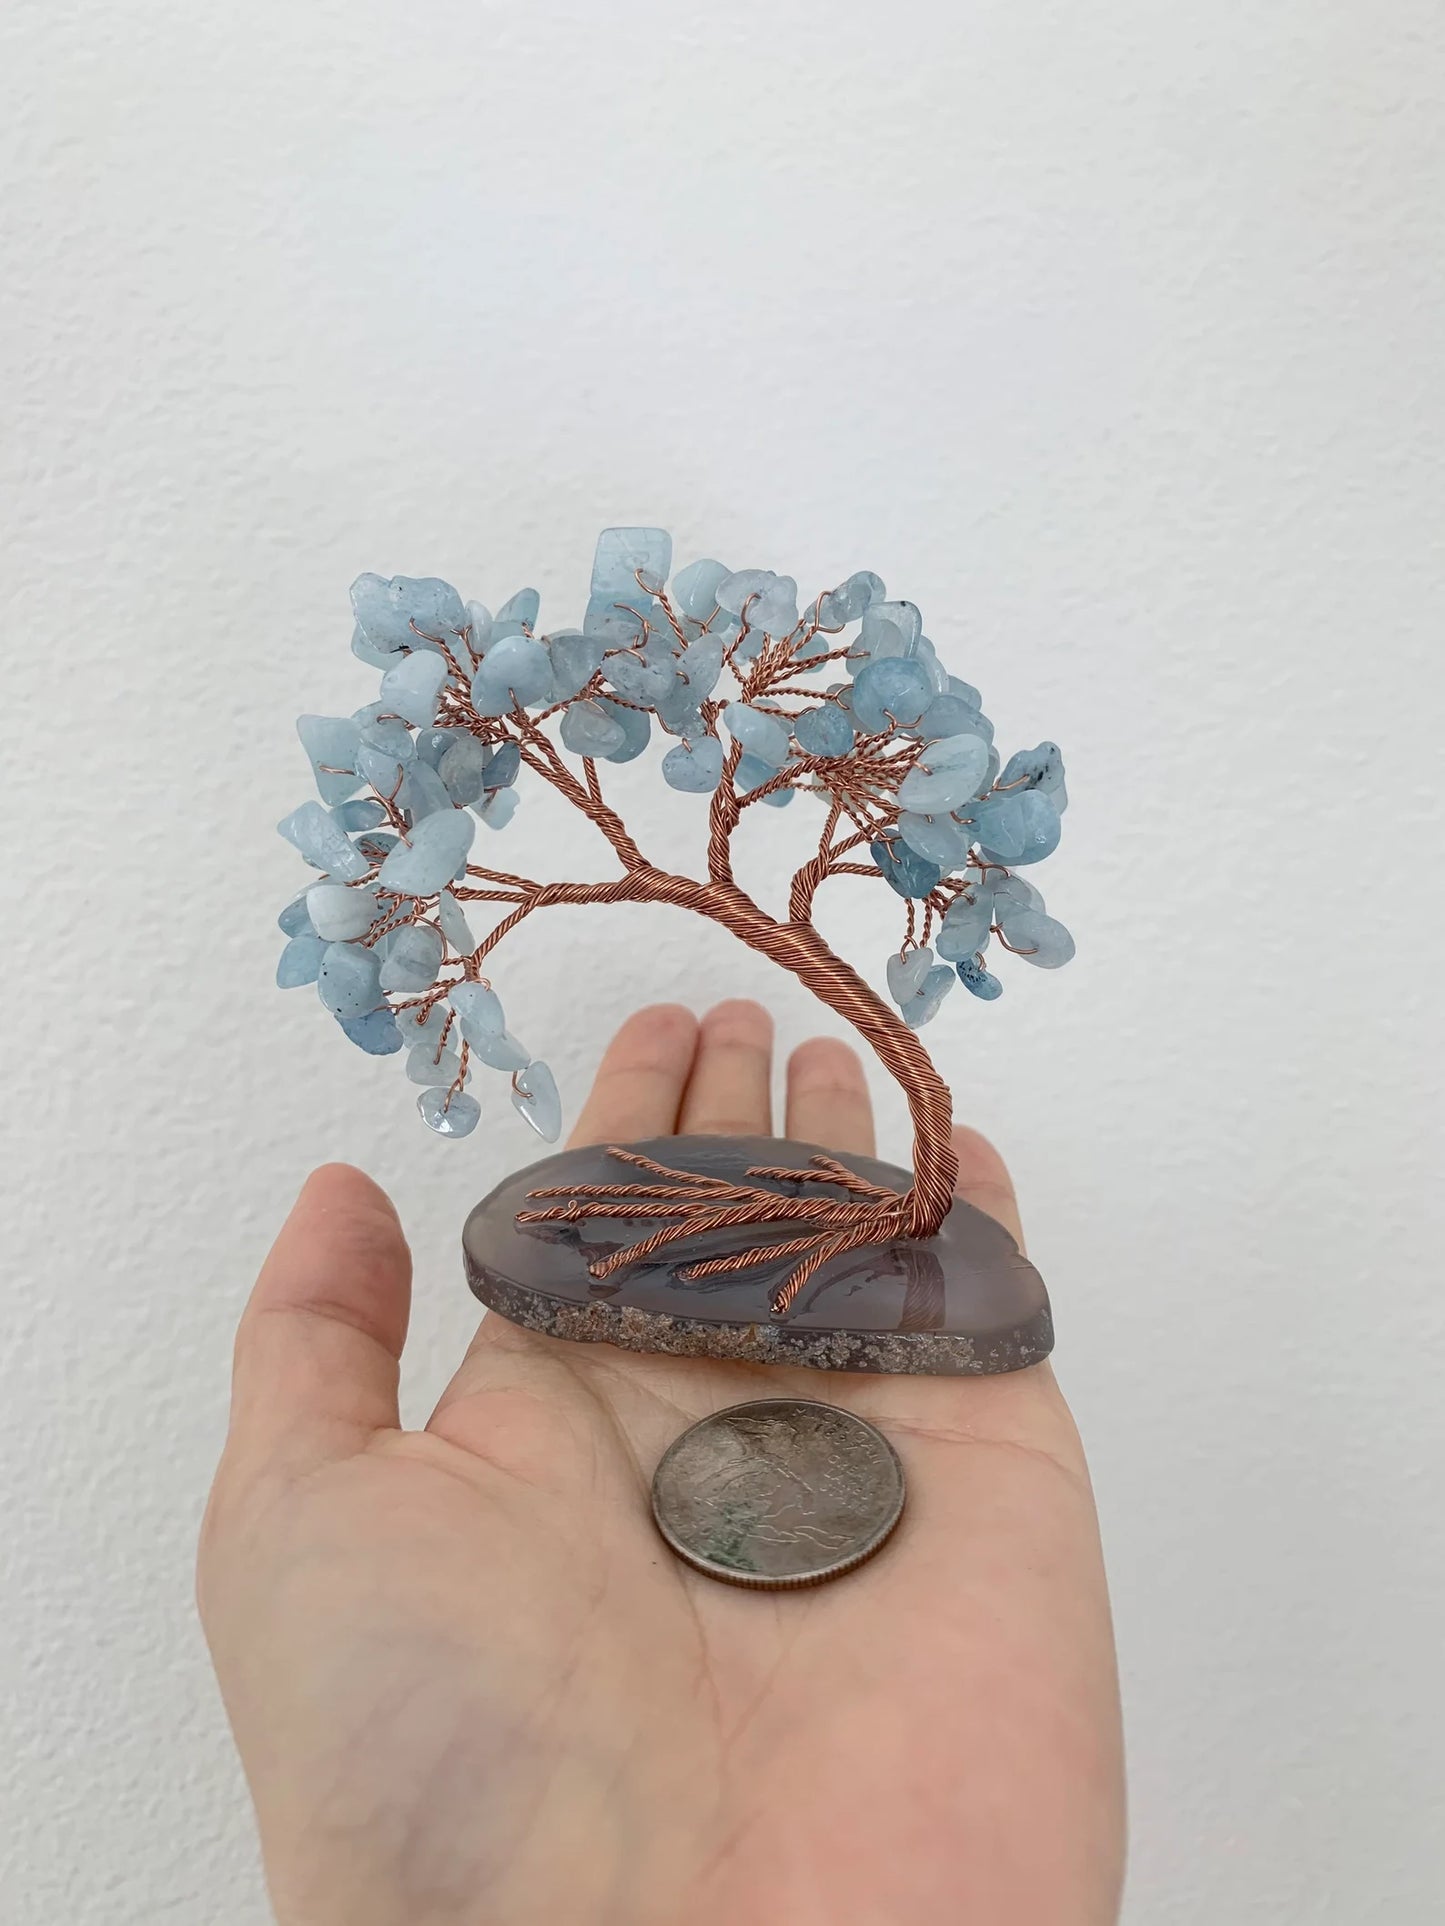 Natural Aquamarine Crystal Money Tree Agate Slice Base Feng Shui Crystal Tree for Wealth Luck Bonsai Chakra Healing Gemstone Tree Wire Sculpture Tree